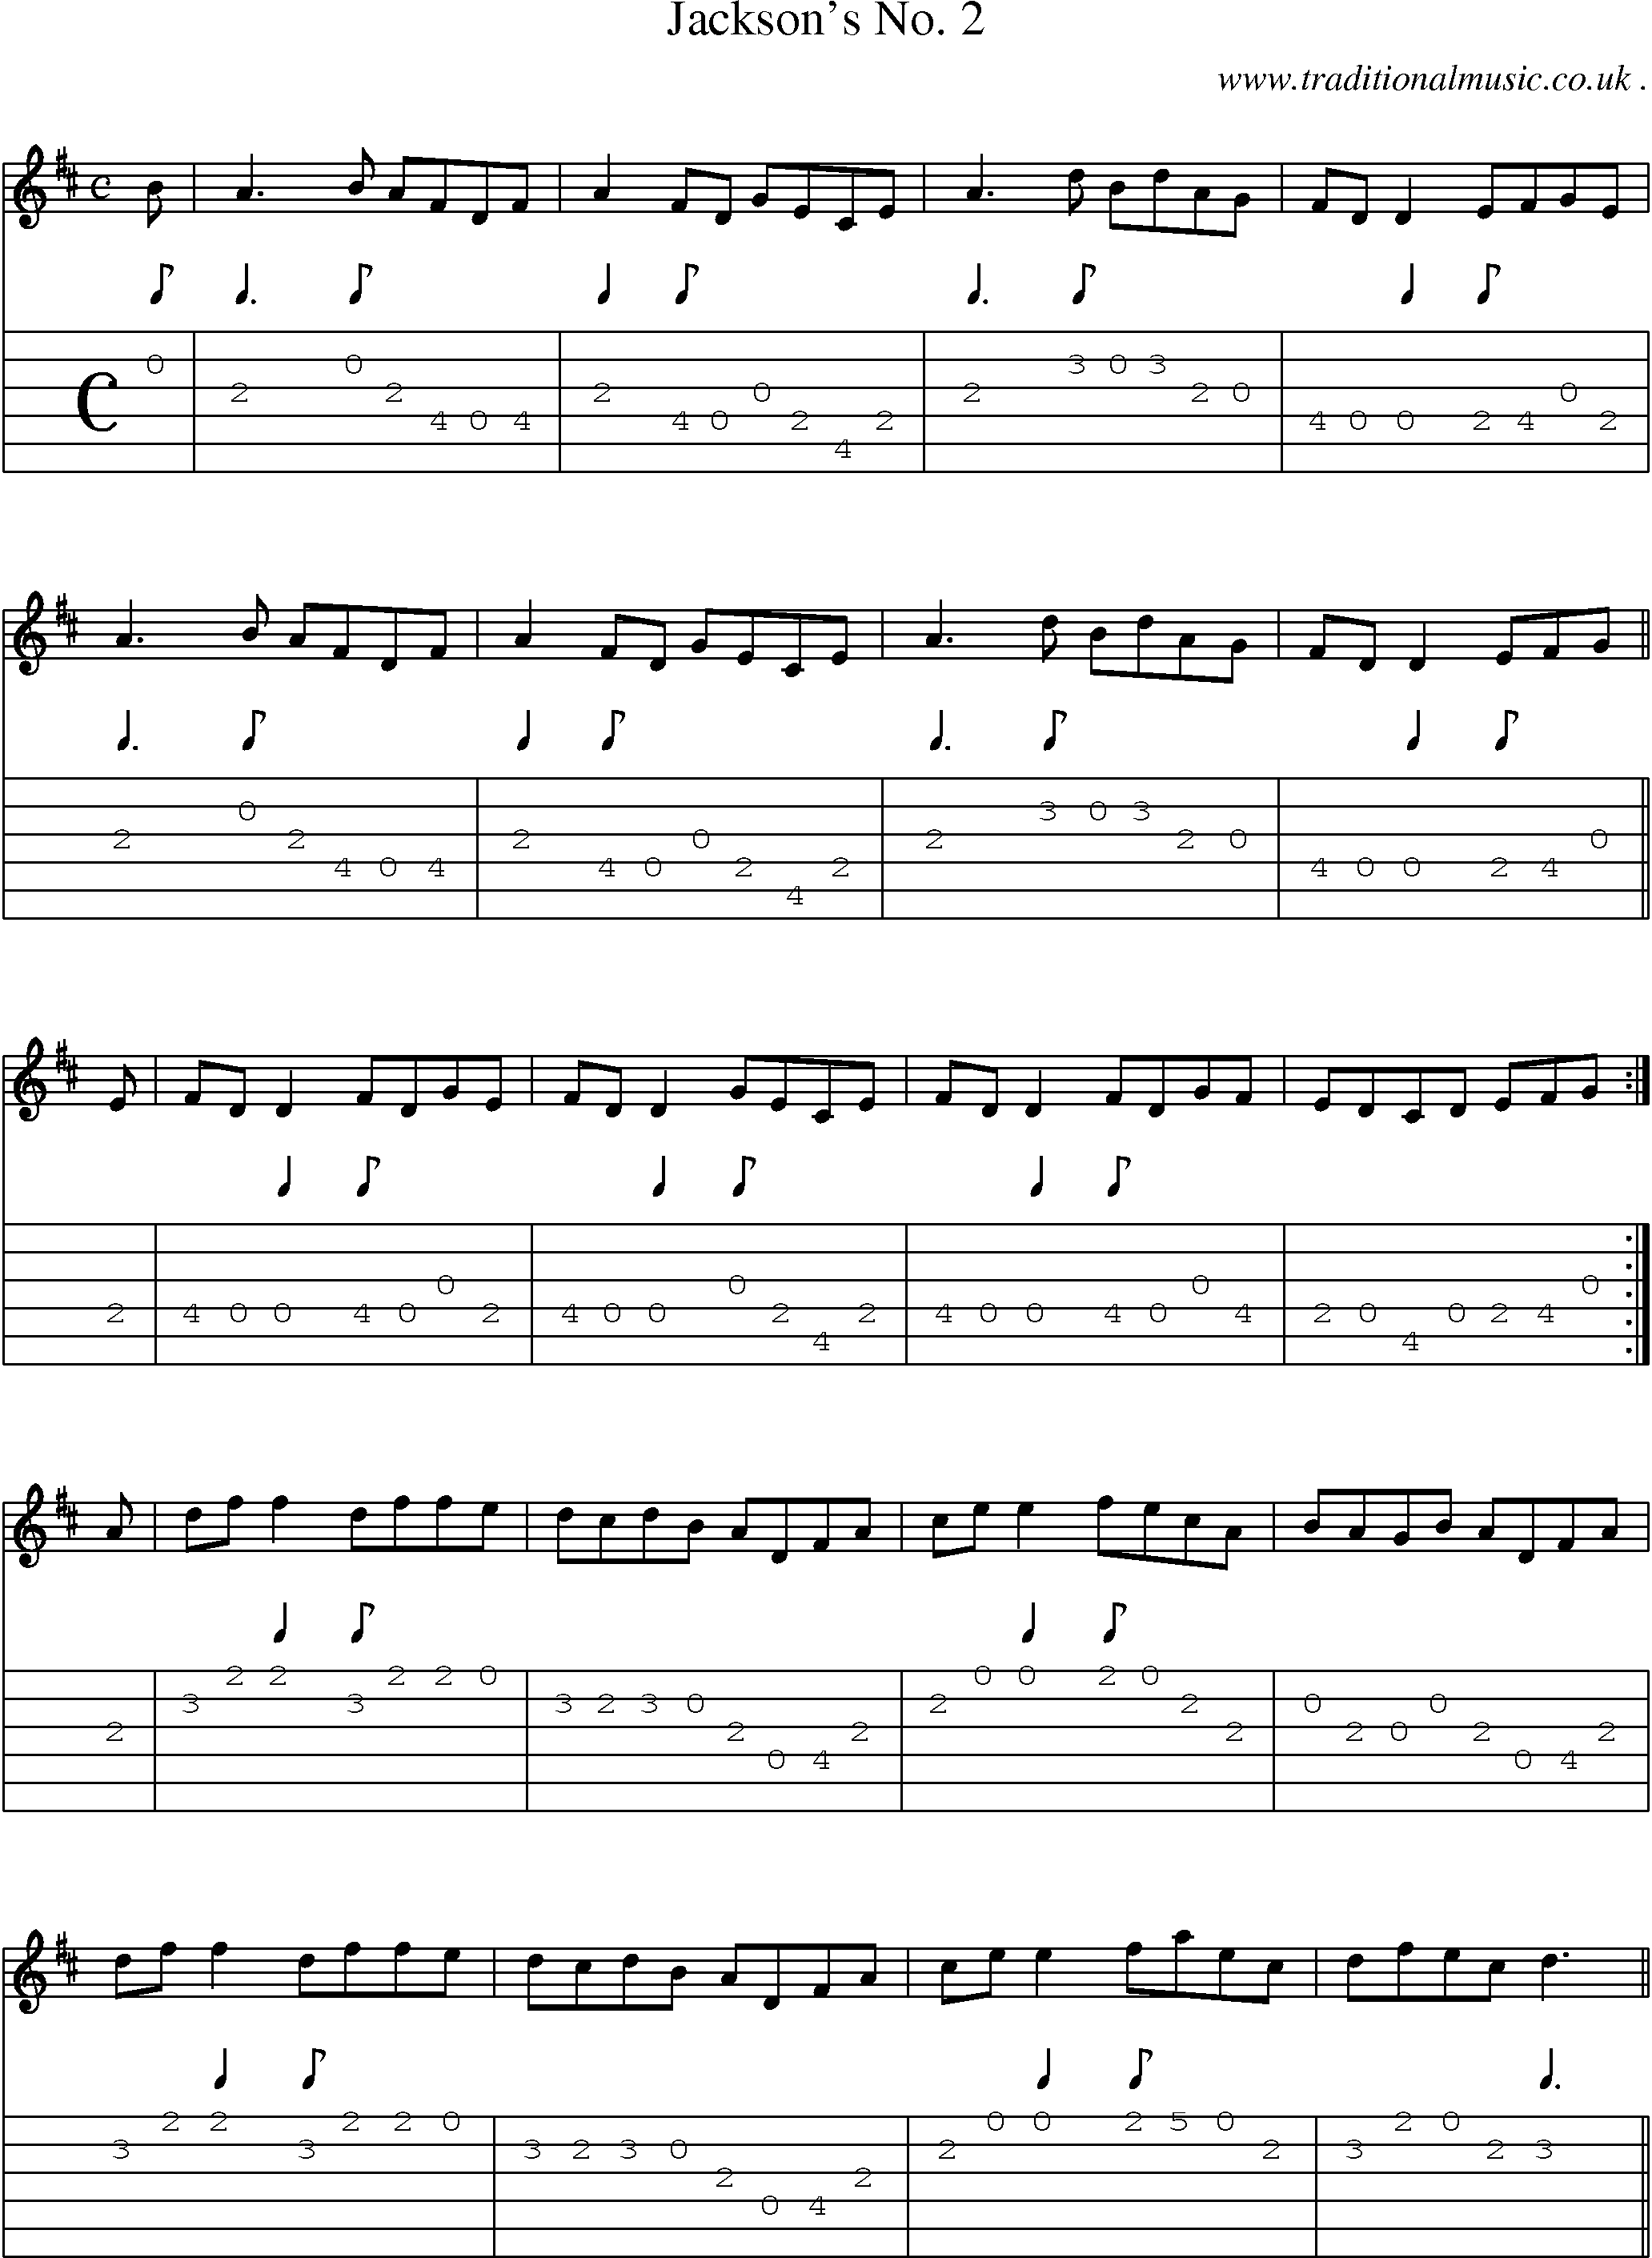 Sheet-Music and Guitar Tabs for Jacksons No 2